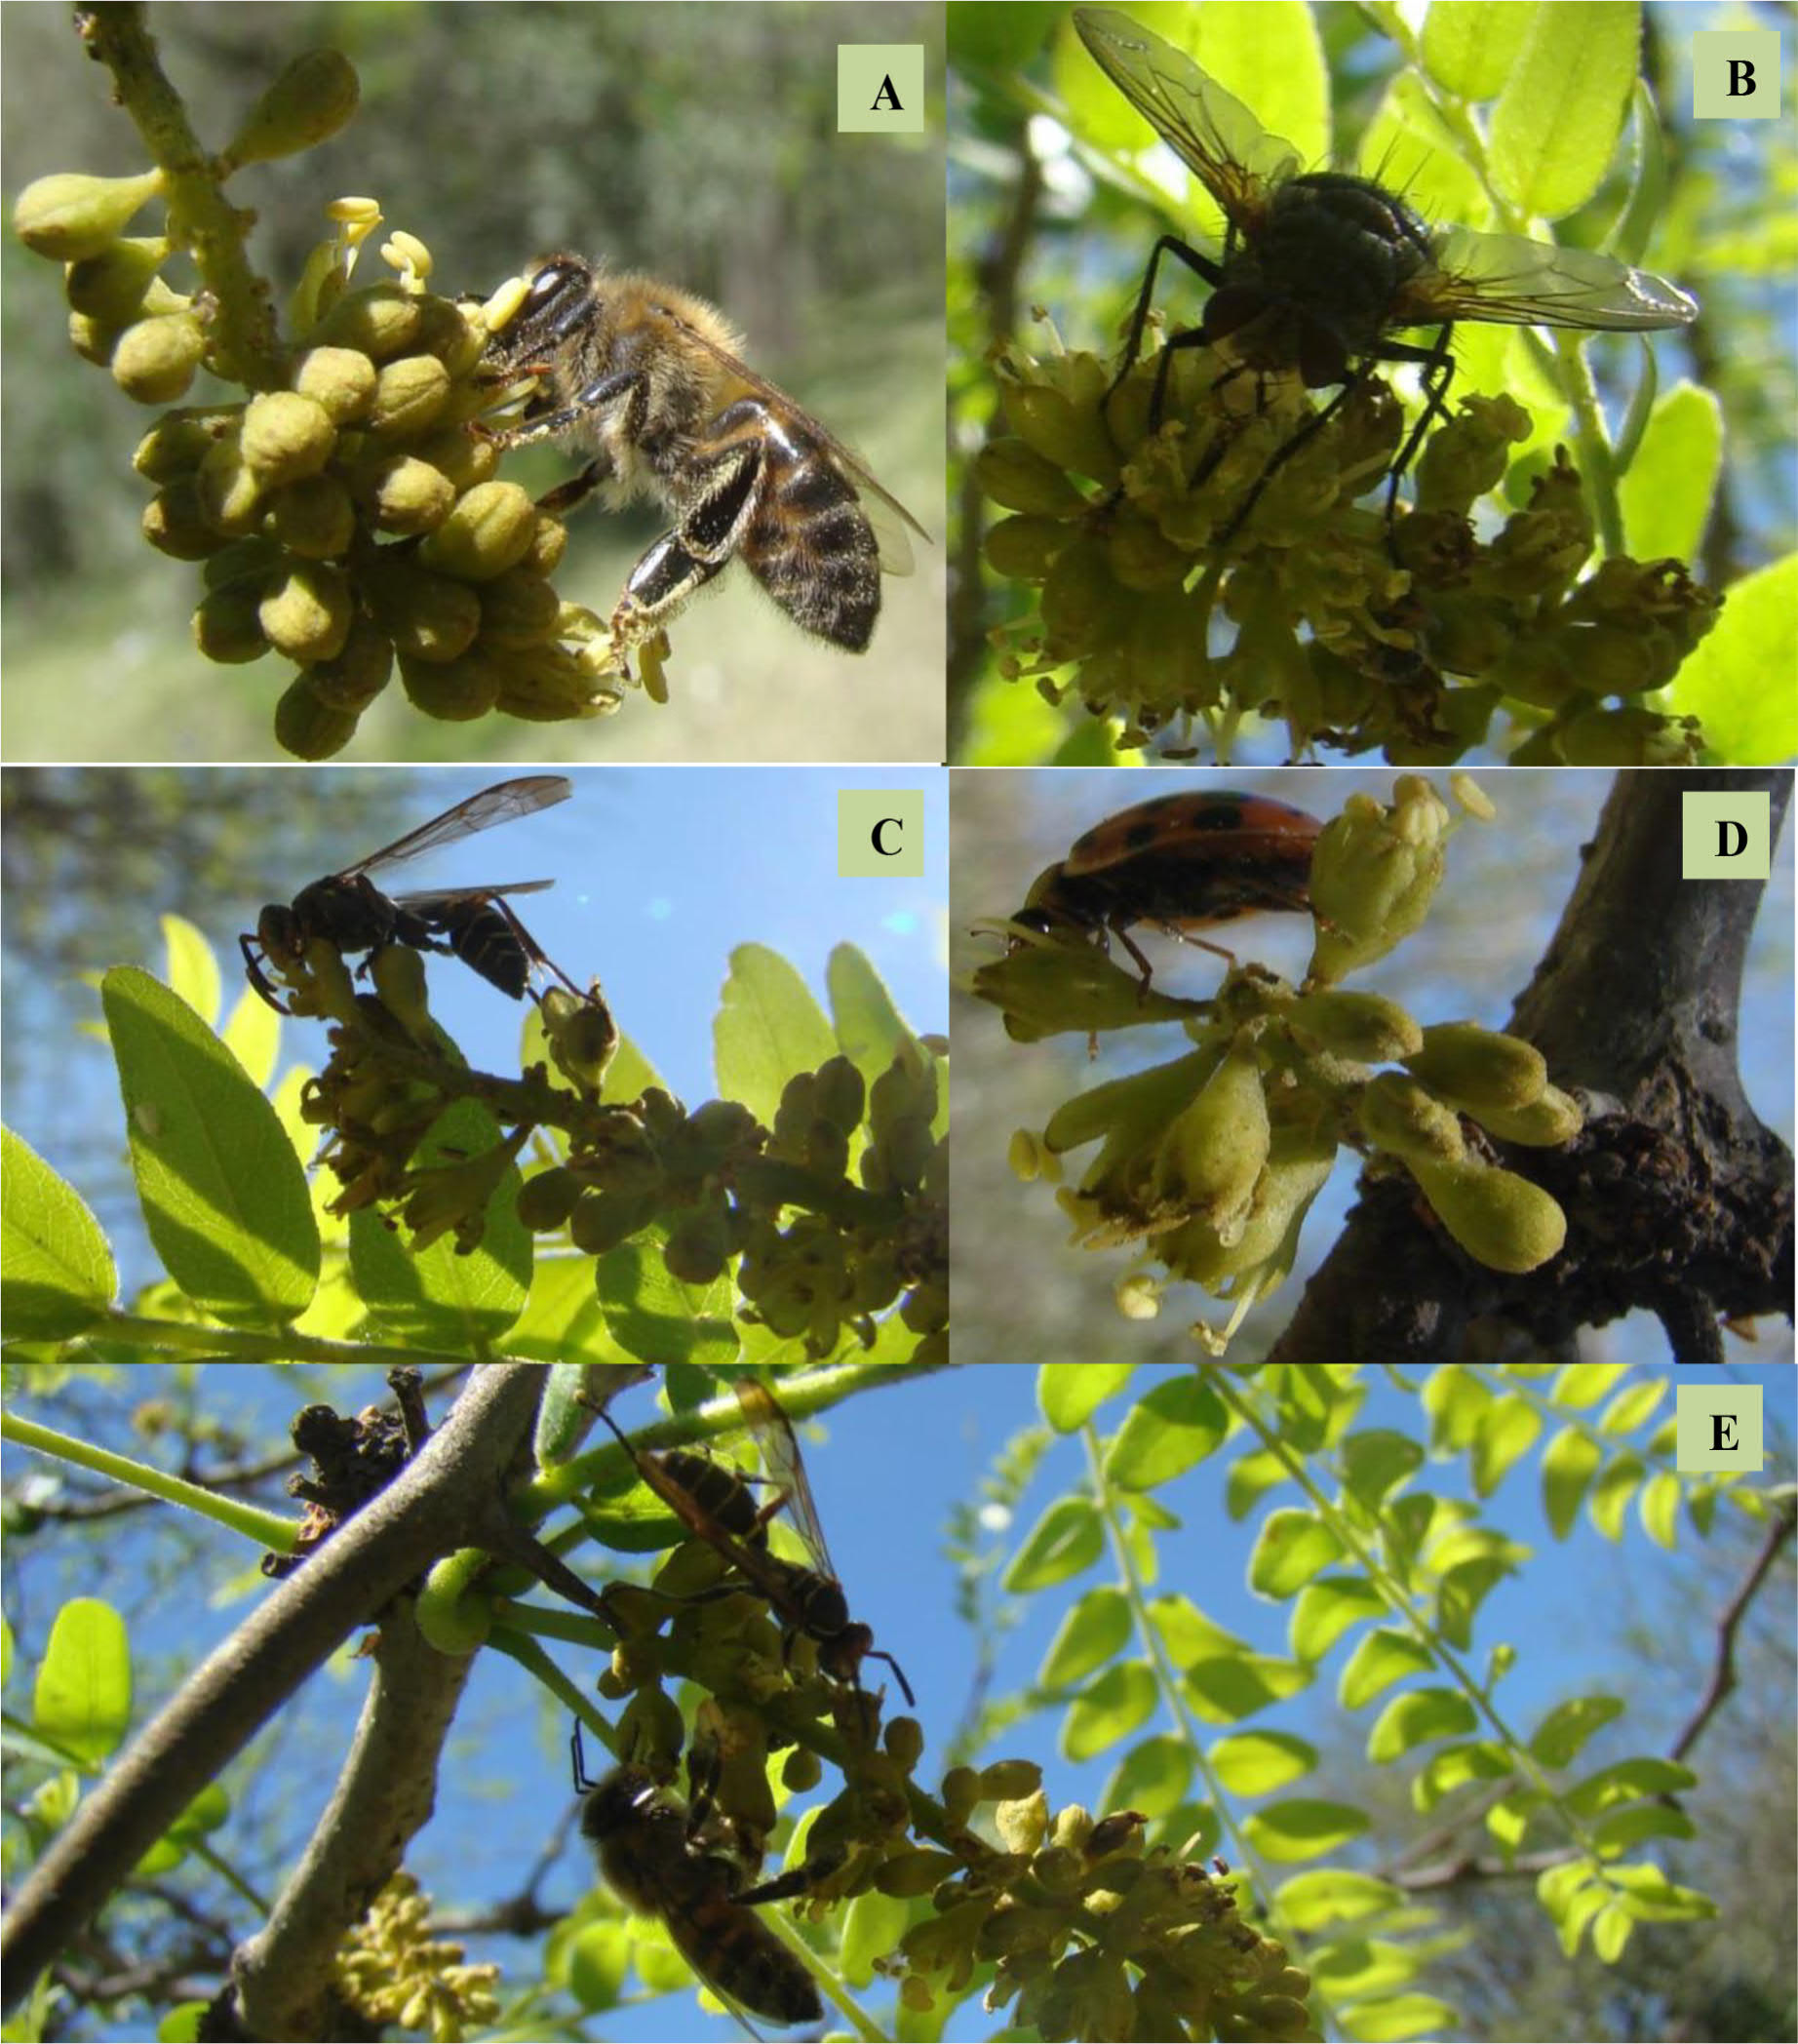 Reproductive biology of the invasive Gleditsia triacanthos L. (Fabaceae)